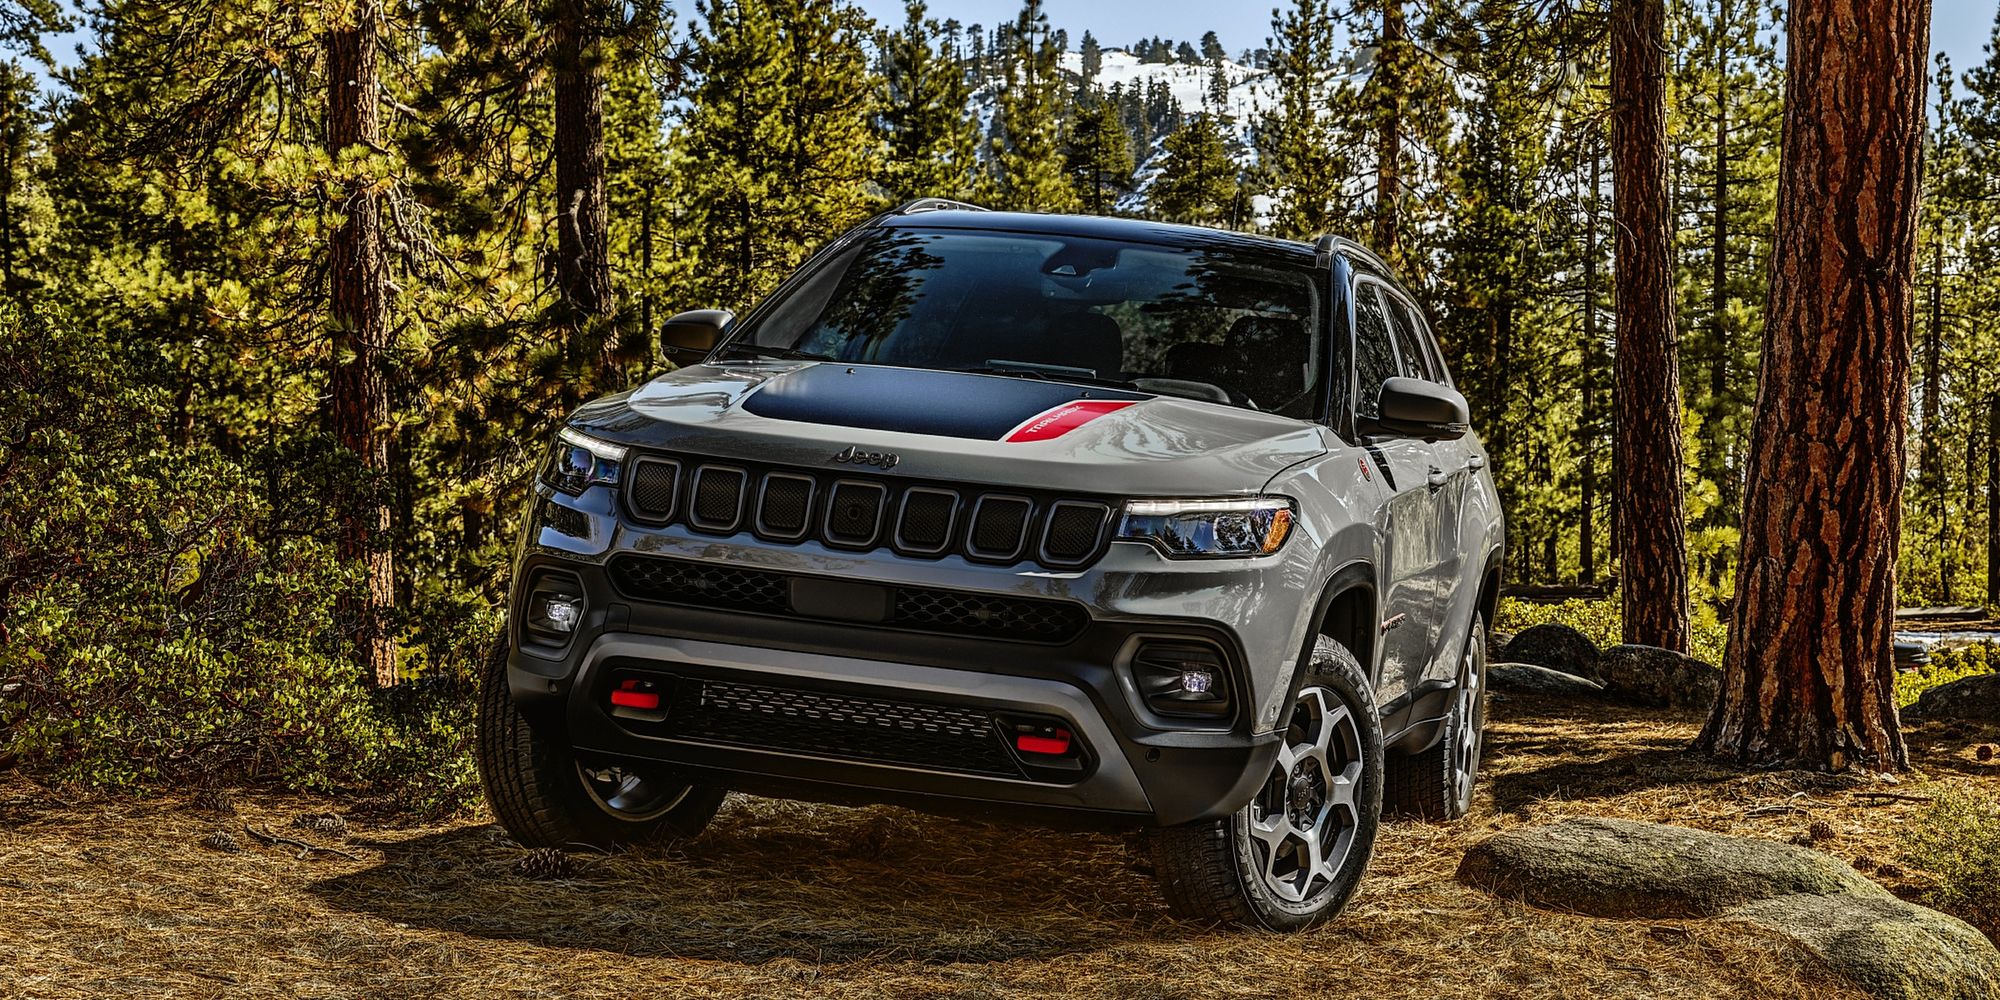 The front of the Jeep Compass Trailhawk